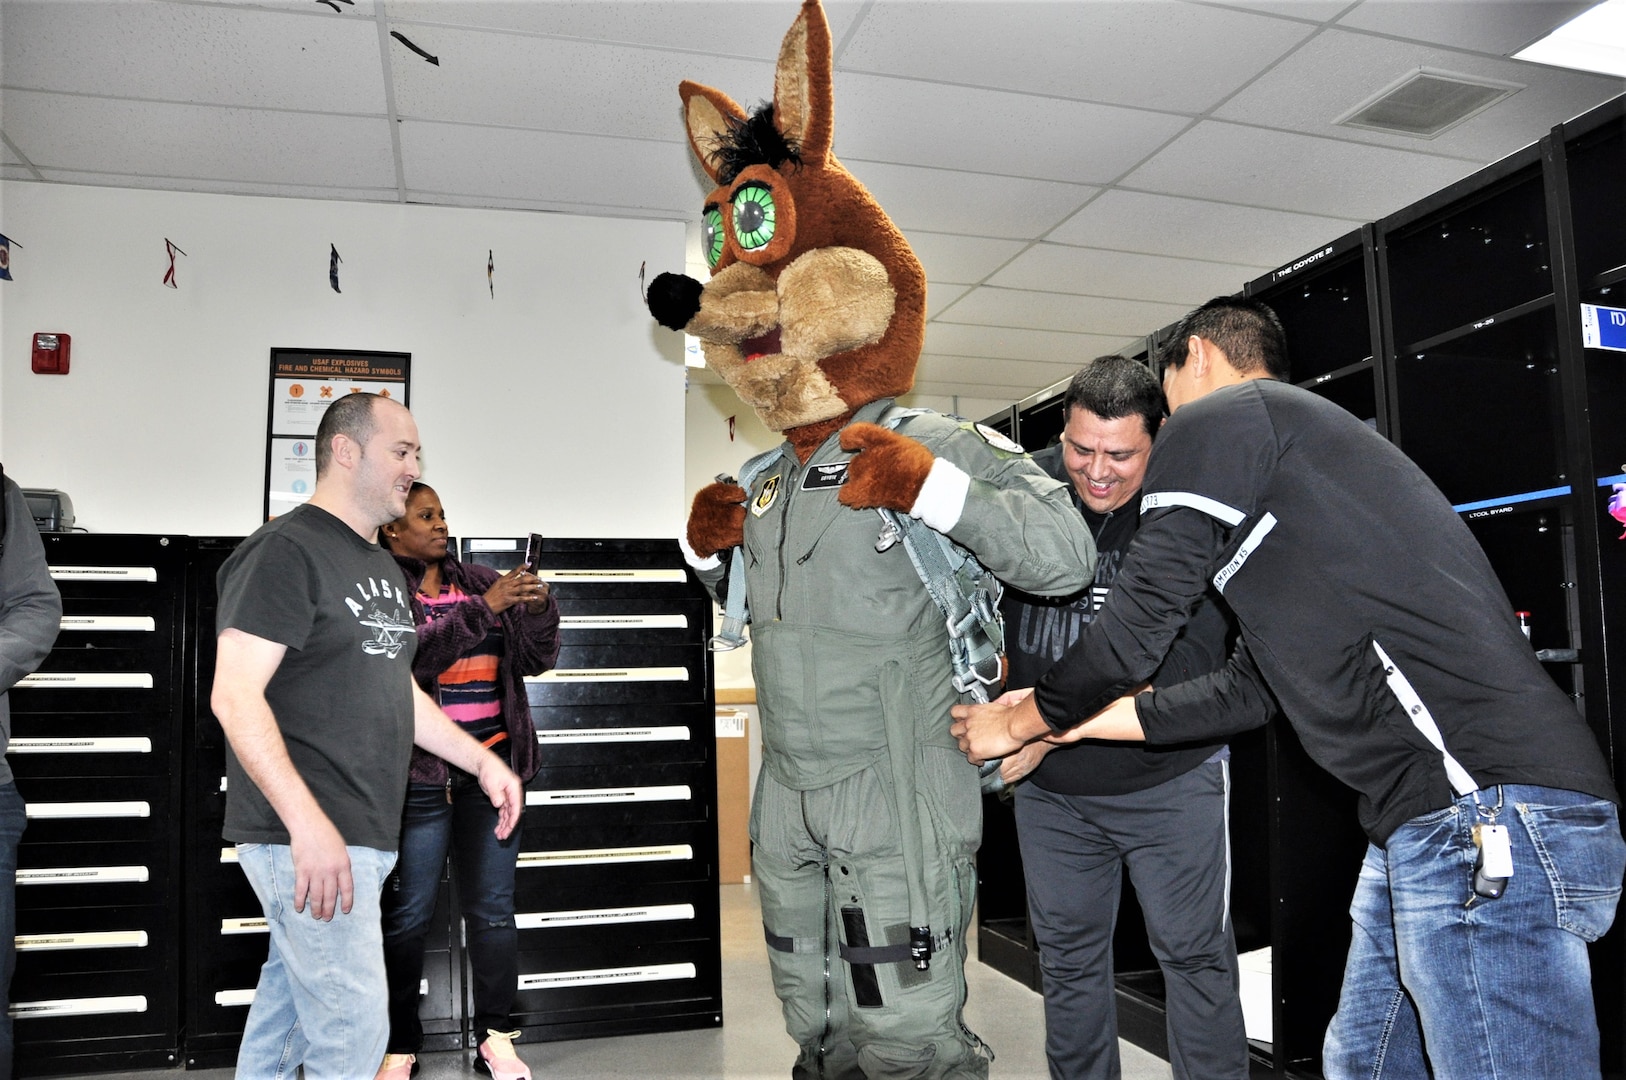 The Spurs Coyote gets fitted for his flight suit in the 559th Training Squadron locker room at Joint Base San Antonio-Randolph, Texas February 25 where Regular Air Force, Air Force Reserve, and civilian Airmen from the 340th Flying Training Group headquarters, 39th Flying Training Squadron T-6 Texan Flight, 12th Flying Training Wing Safety, 559th Flying Training Squadron T-6 team, and 3rd Combat Camera Squadron (JBSA-Lackland) members, and the NBA San Antonio Spurs production crew worked to put the Coyote through the pilot training process. Video footage will be used for a Spurs Military Appreciation video to be shown during the March 10 game. (U.S. Air Force photo by Janis El Shabazz)